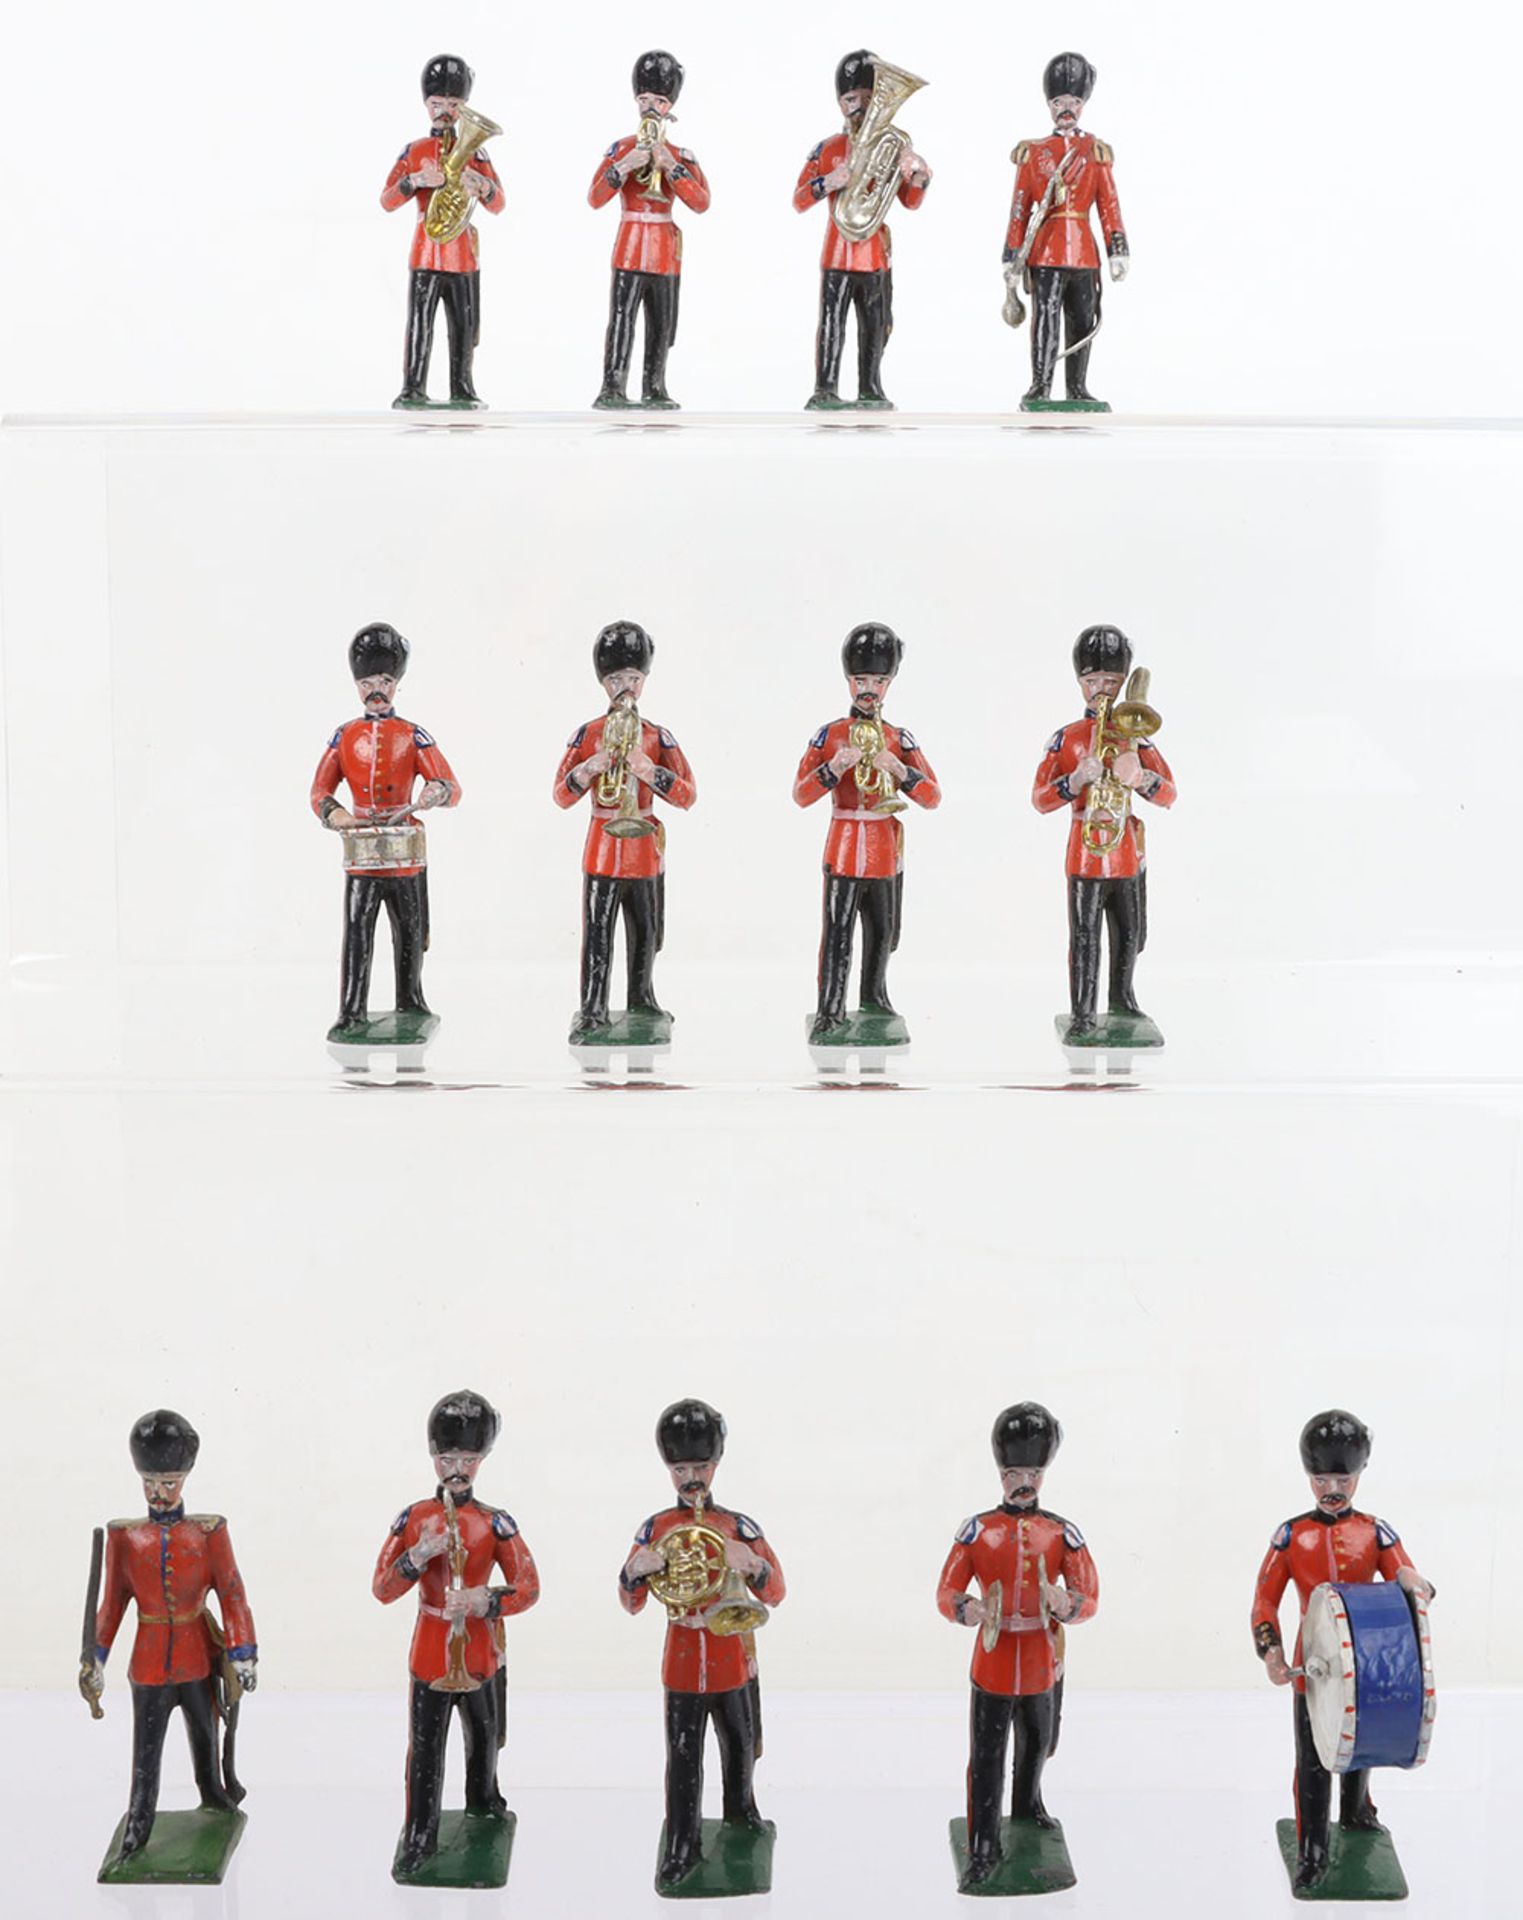 Band of the Grenadier Guards 60mm size